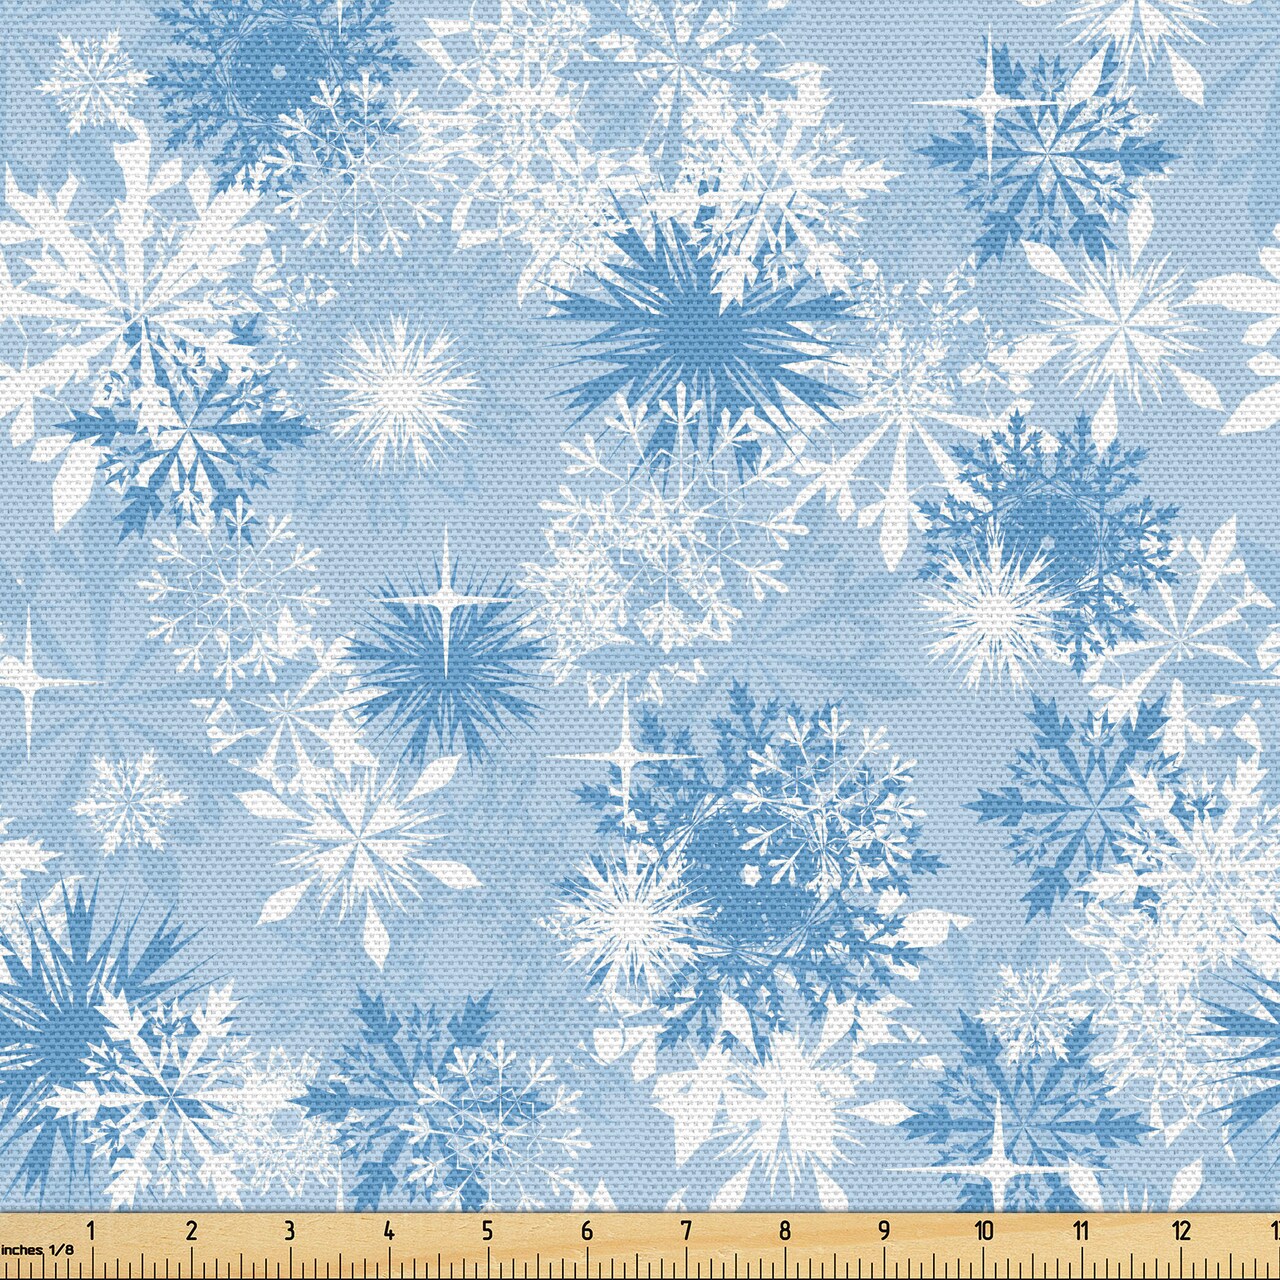 Ambesonne Snowflake Fabric by the Yard, Winter Holiday Illustration Christmas Snowflakes on Abstract Background, Decorative Fabric for Upholstery and Home Accents, 10 Yards, Pale Blue White